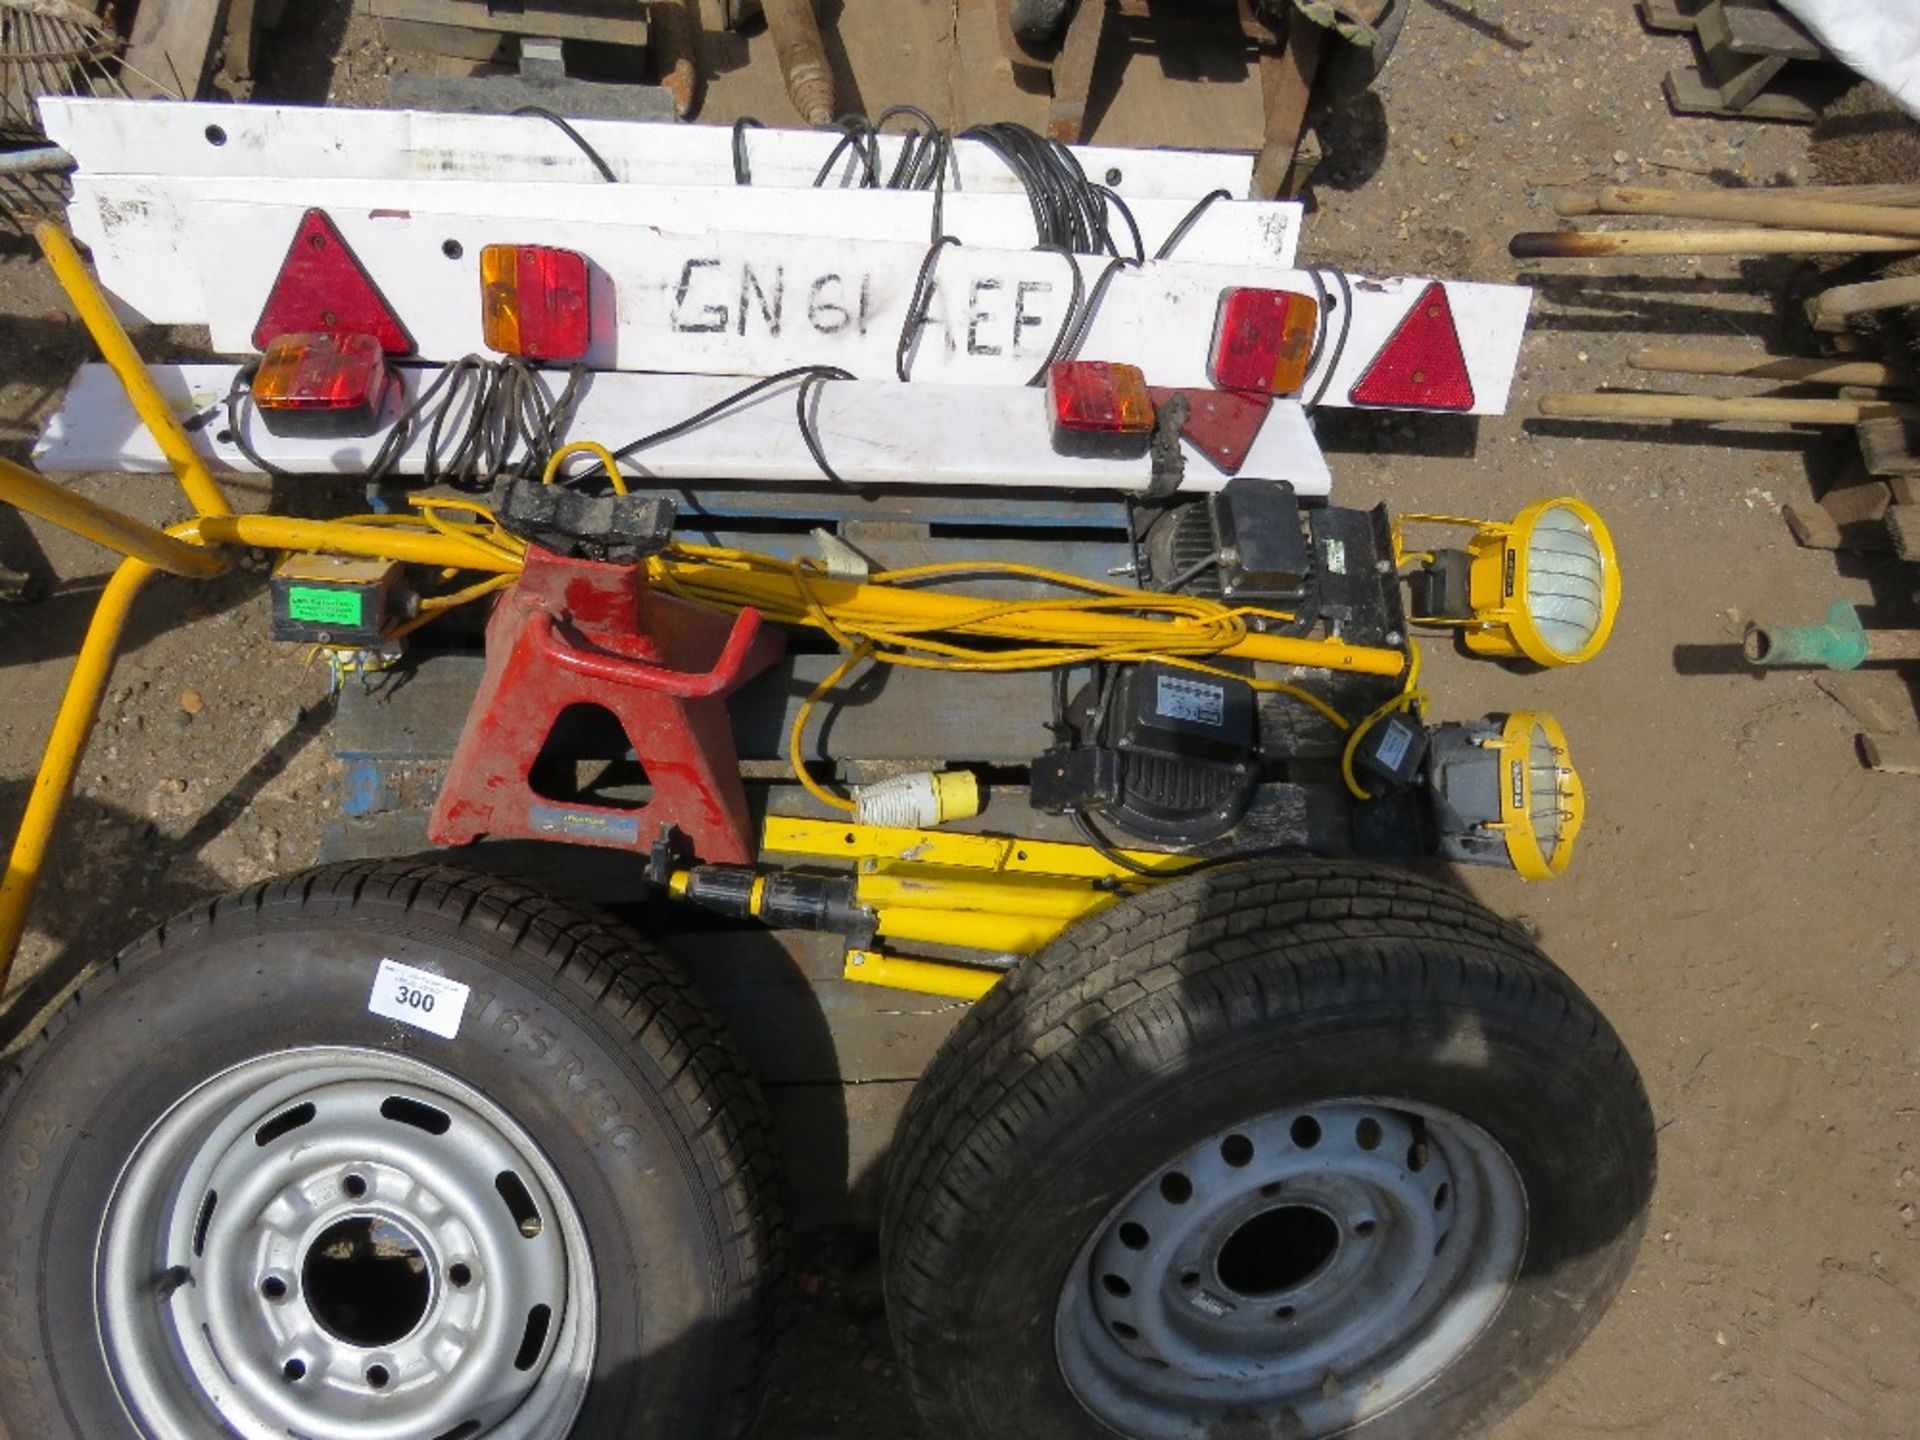 PALLET CONTAINING 2 X TRAILER WHEELS, 1 X AXLE STAND, WORK LIGHTS AND 4 X TRAILER LIGHT BOARDS